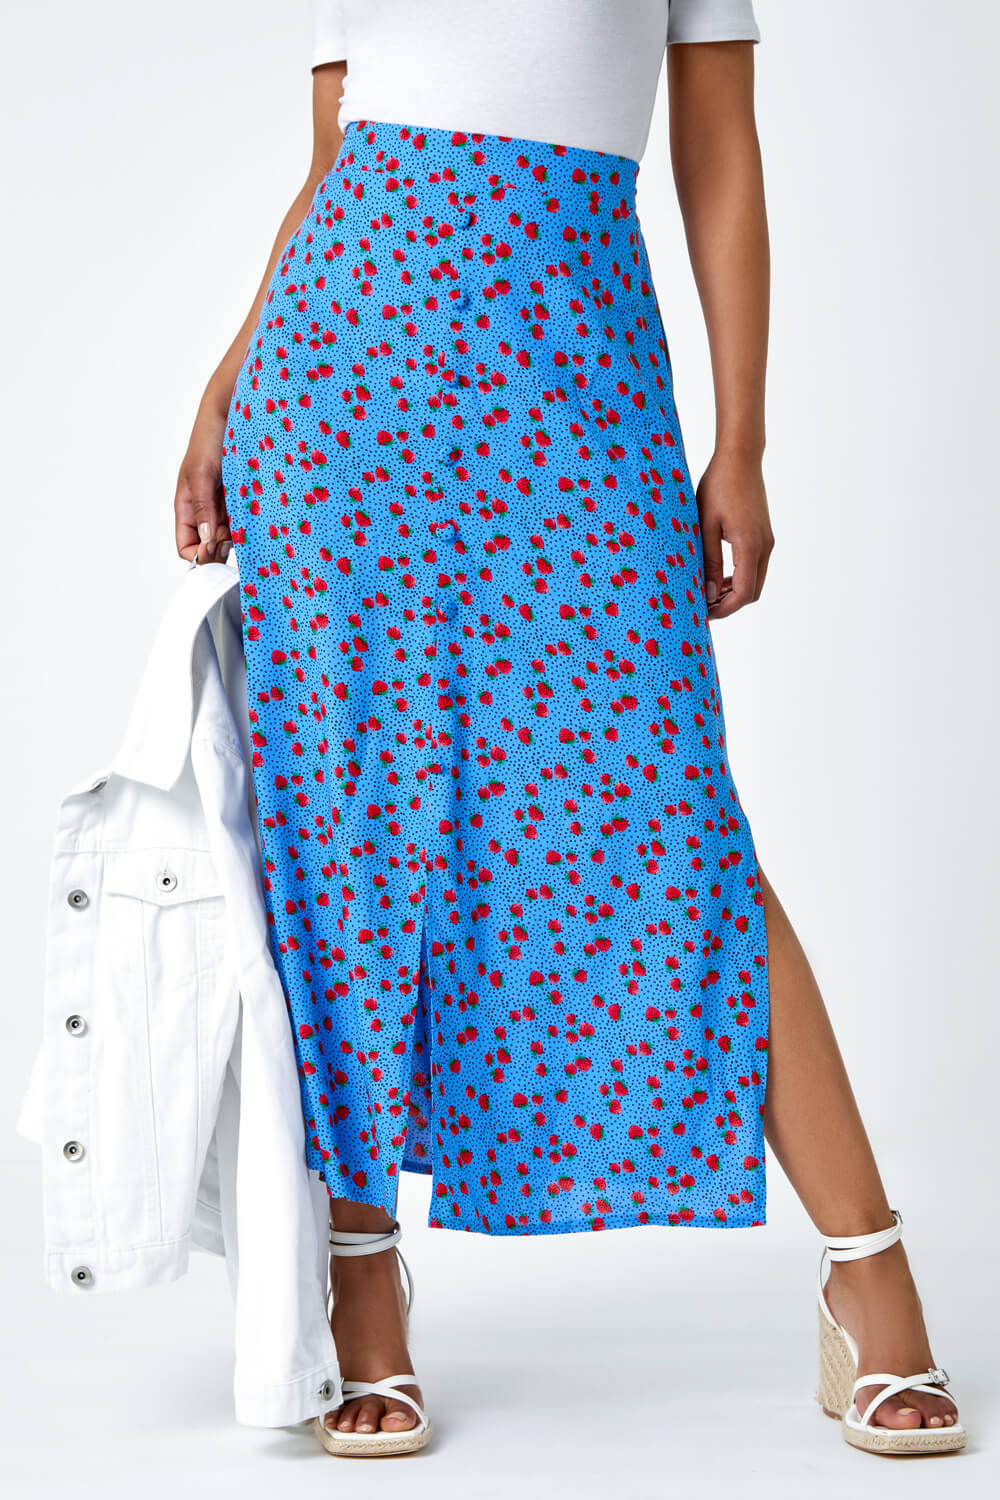 Blue Petite Strawberry Button Stretch Skirt, Image 4 of 5